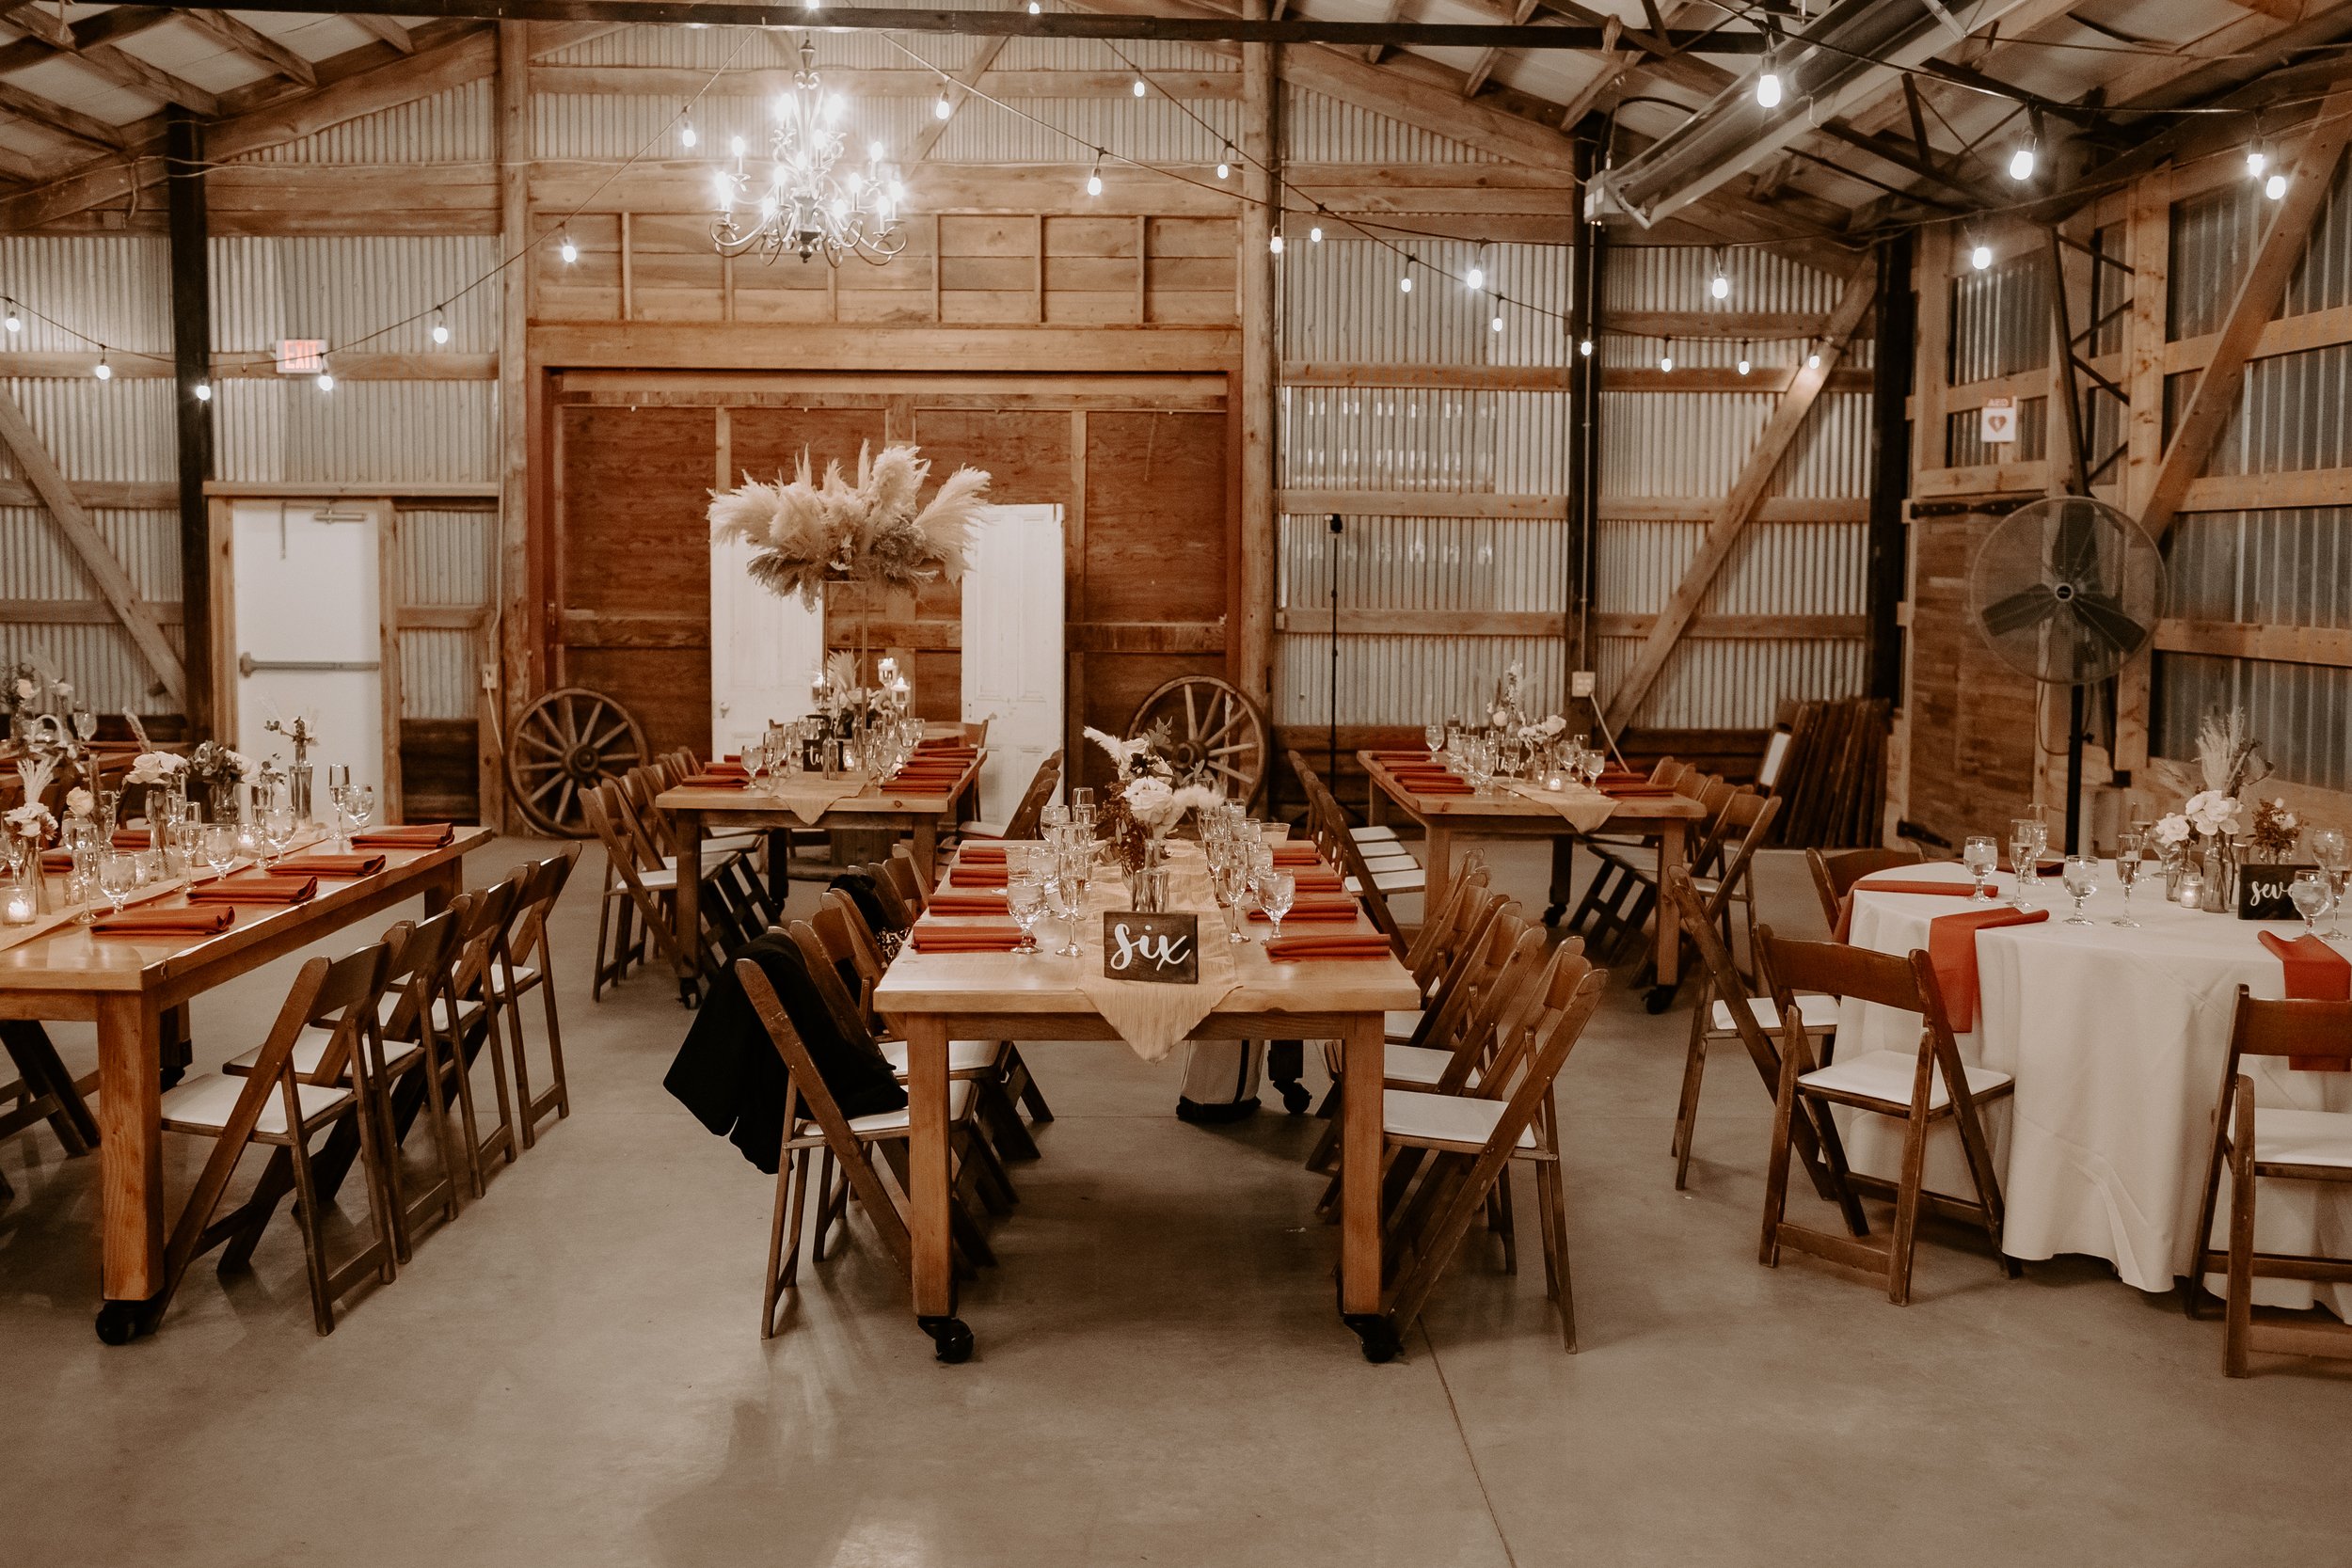 Farm Tables at Covered Bridge - Barn - low and Tall.jpg